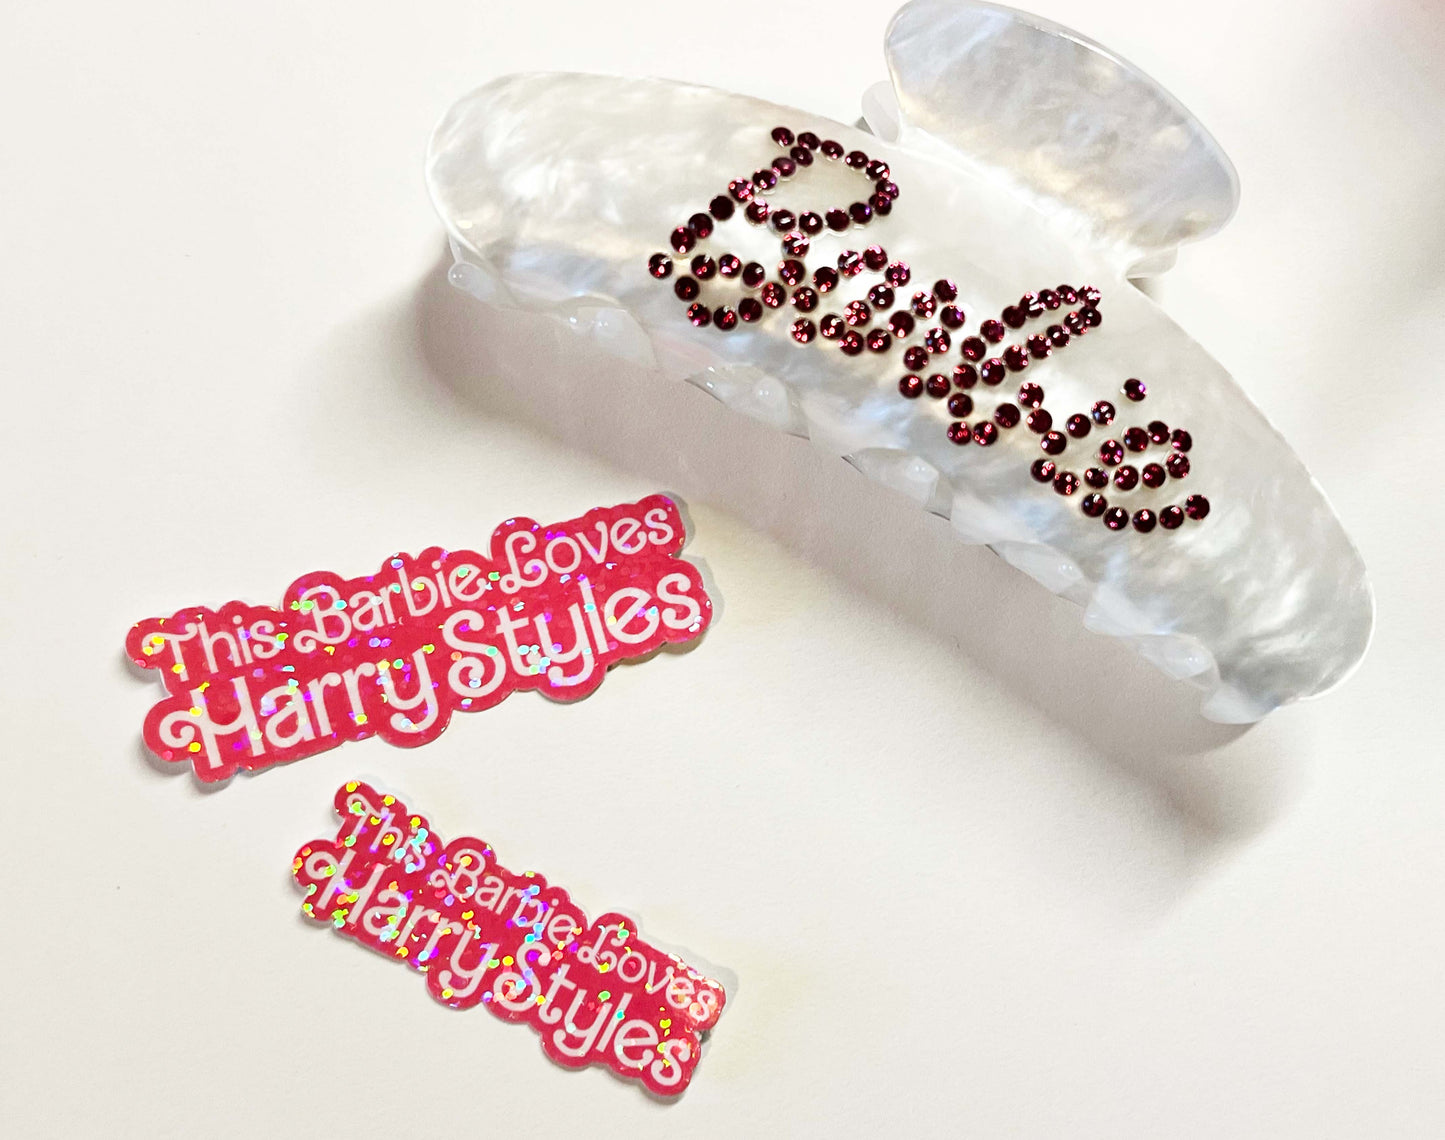 This Barbie Loves HS  - Pink Glitter Stickers